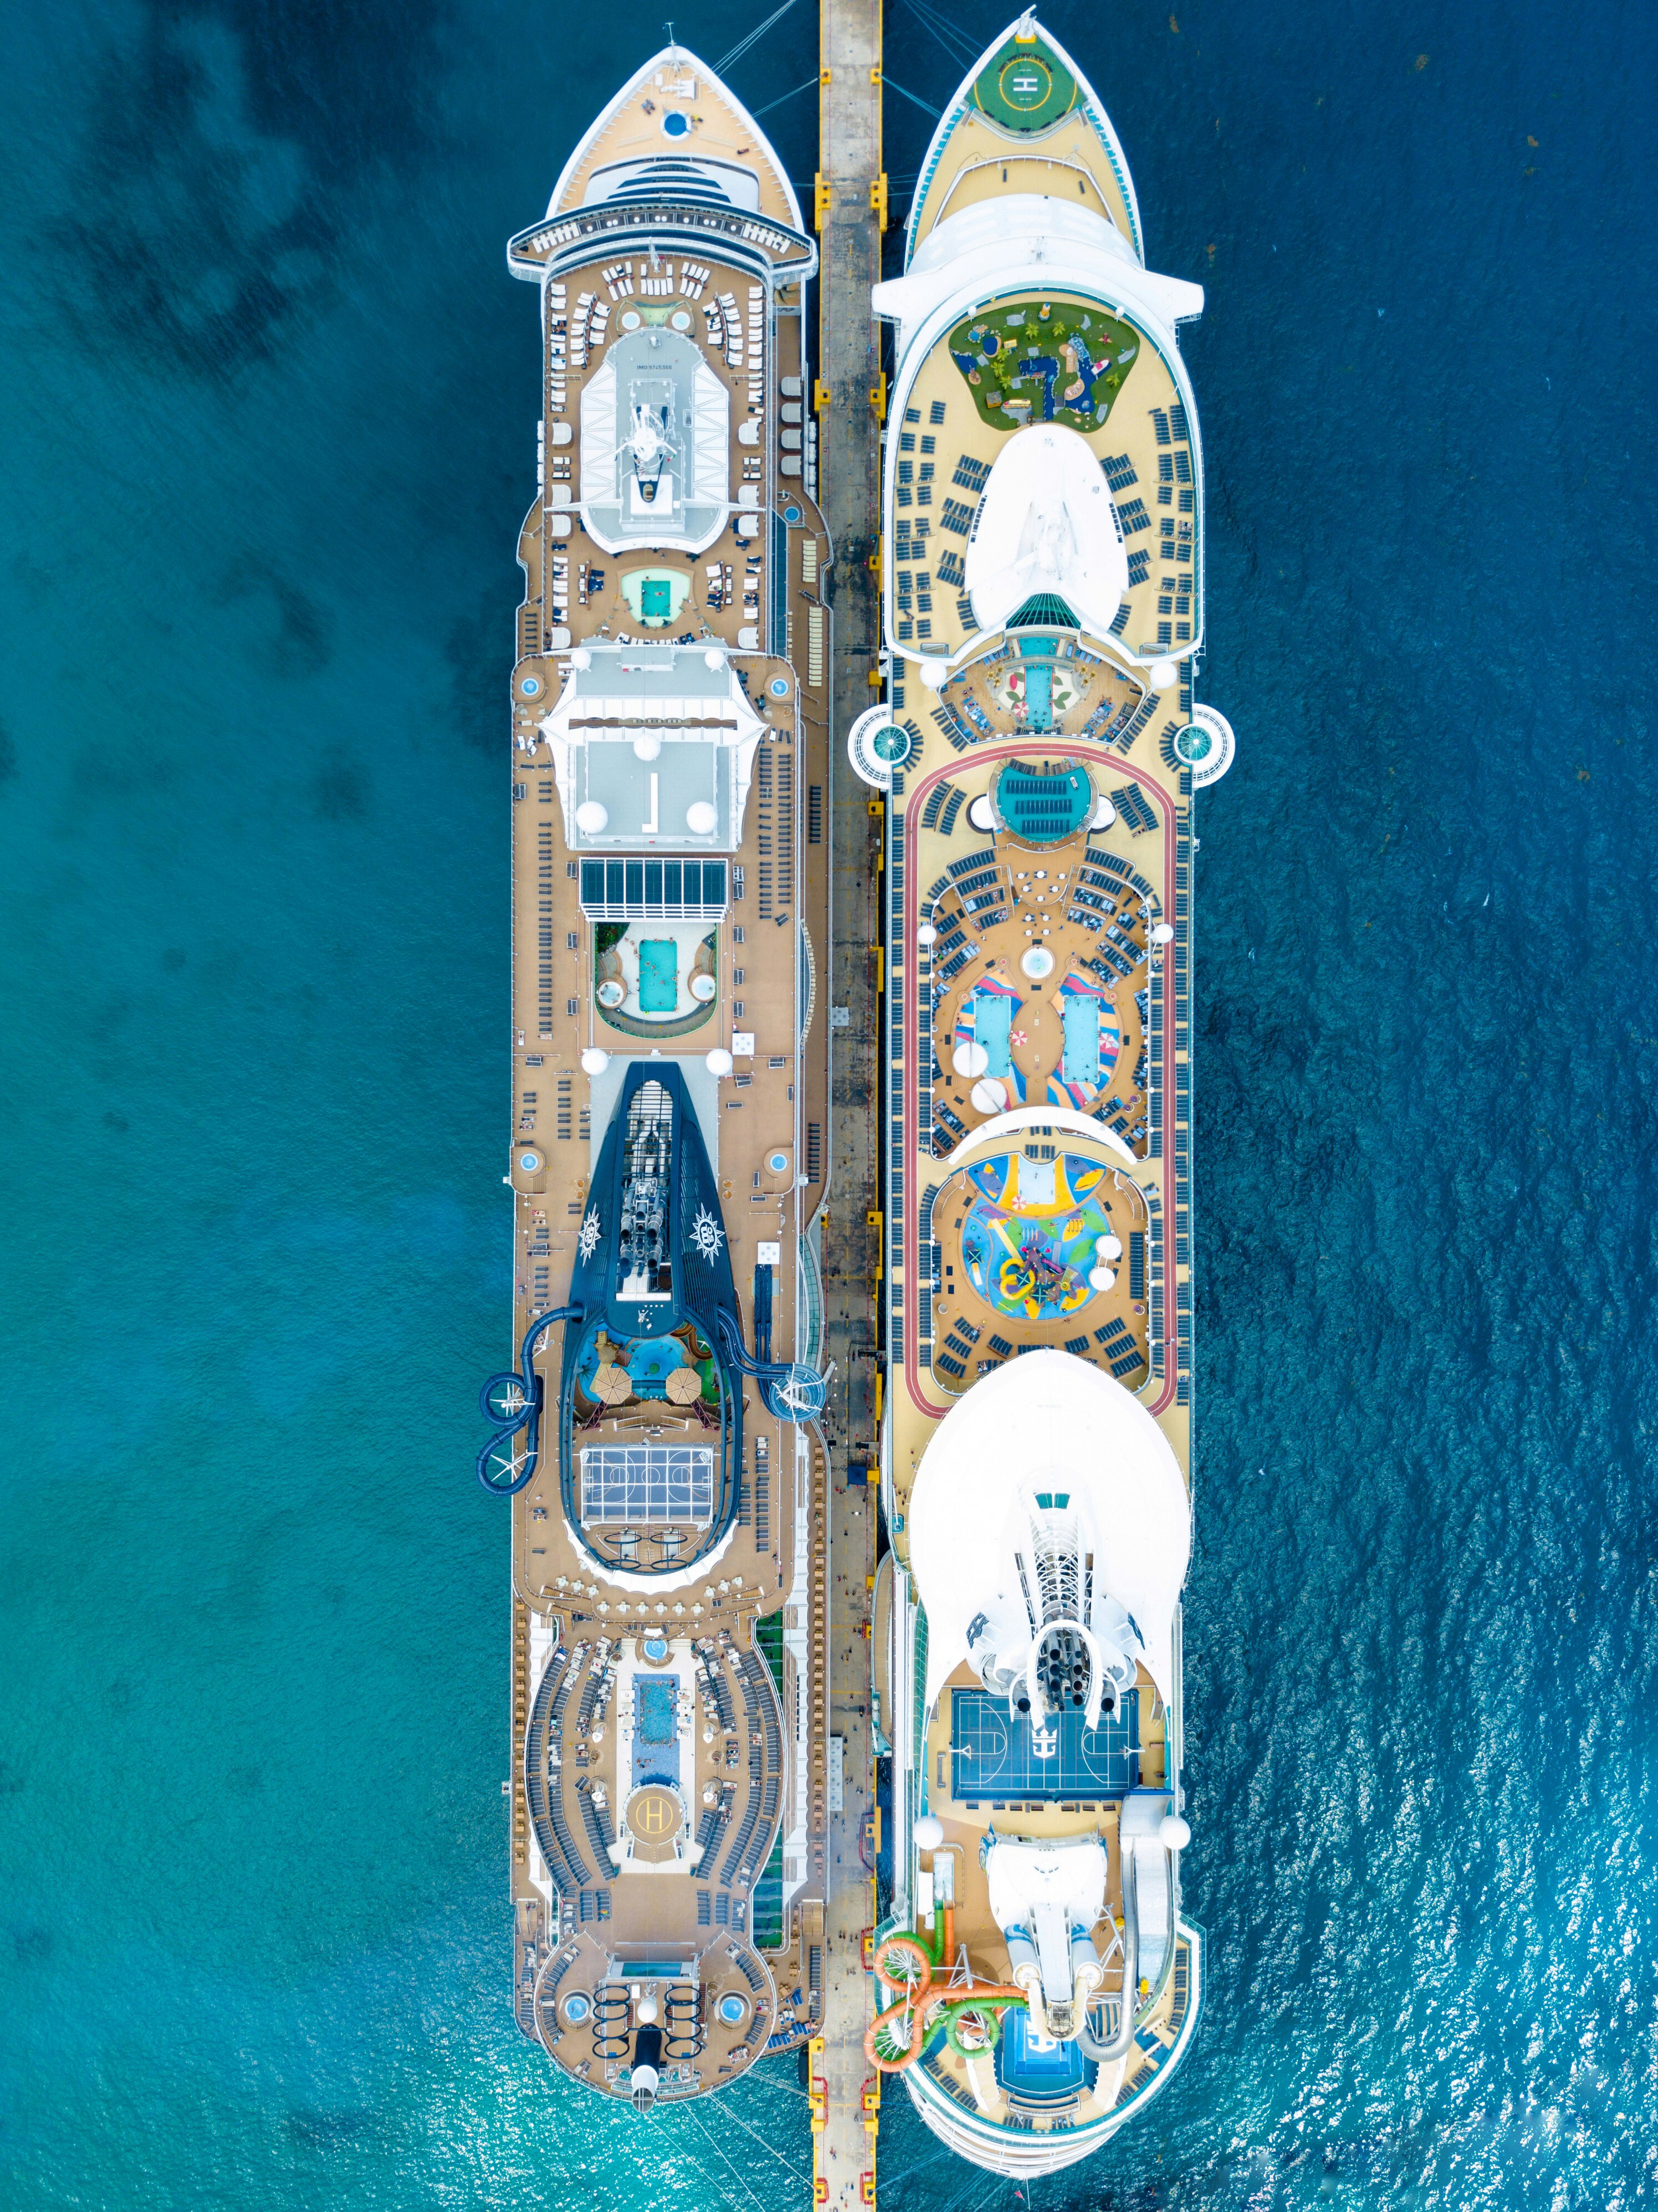 This photo was taken at the cruise port in Costa Maya, Mexico. The ship on the right is the Royal Caribbean Liberty of the Seas and the ship on the right is the MSC seaside. It is very cool to see the differences in the ships from above. Which ship would you prefer to be on?